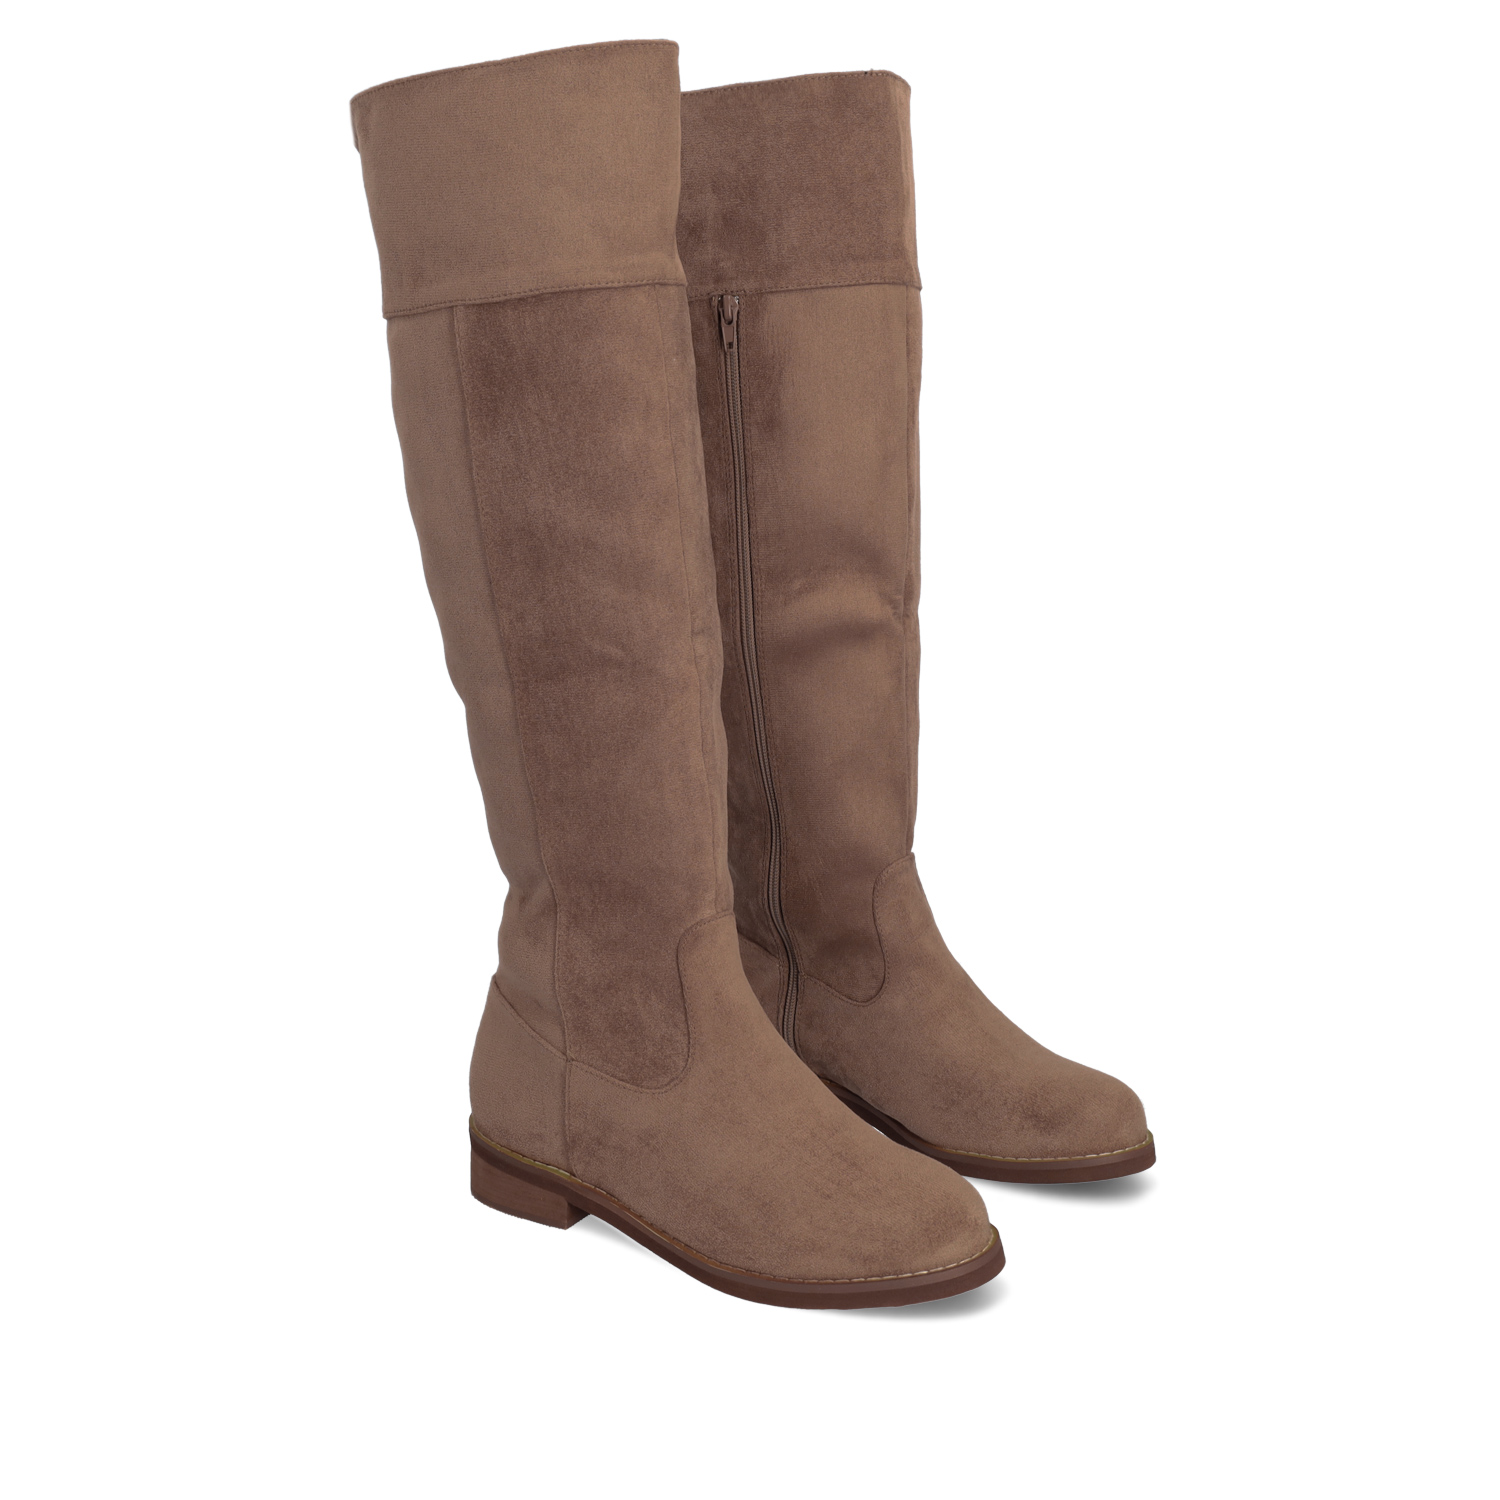 Flat knee-high boots in light brown faux suede 